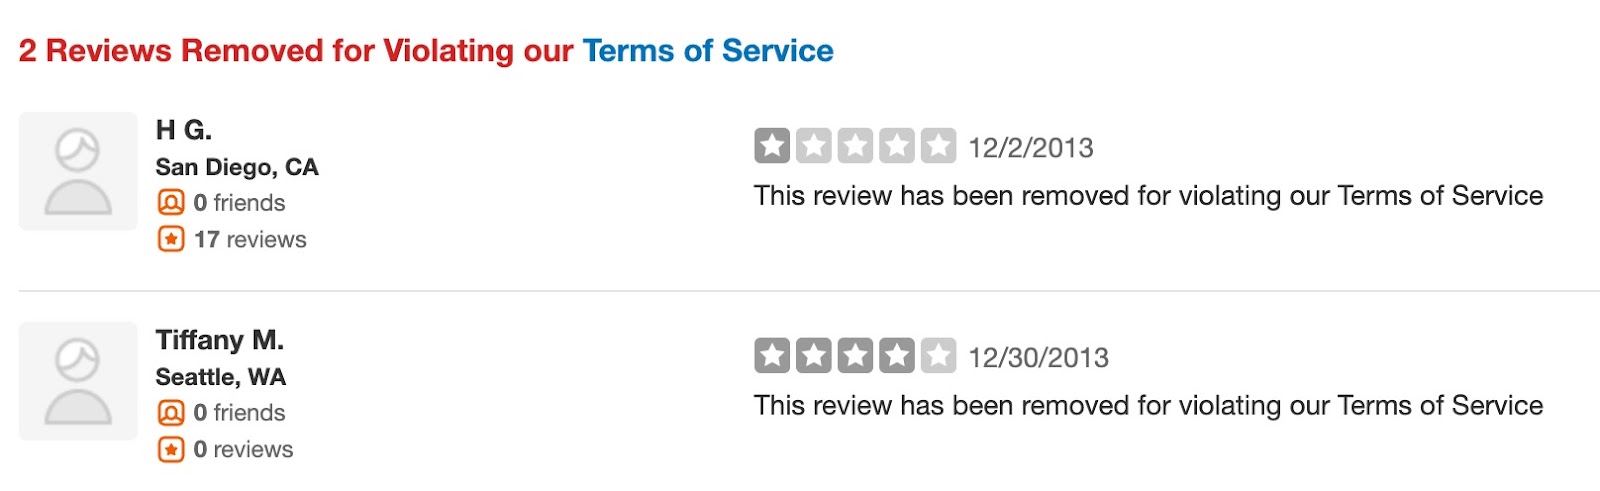 2 Yelp reviews removed for violating terms of service.